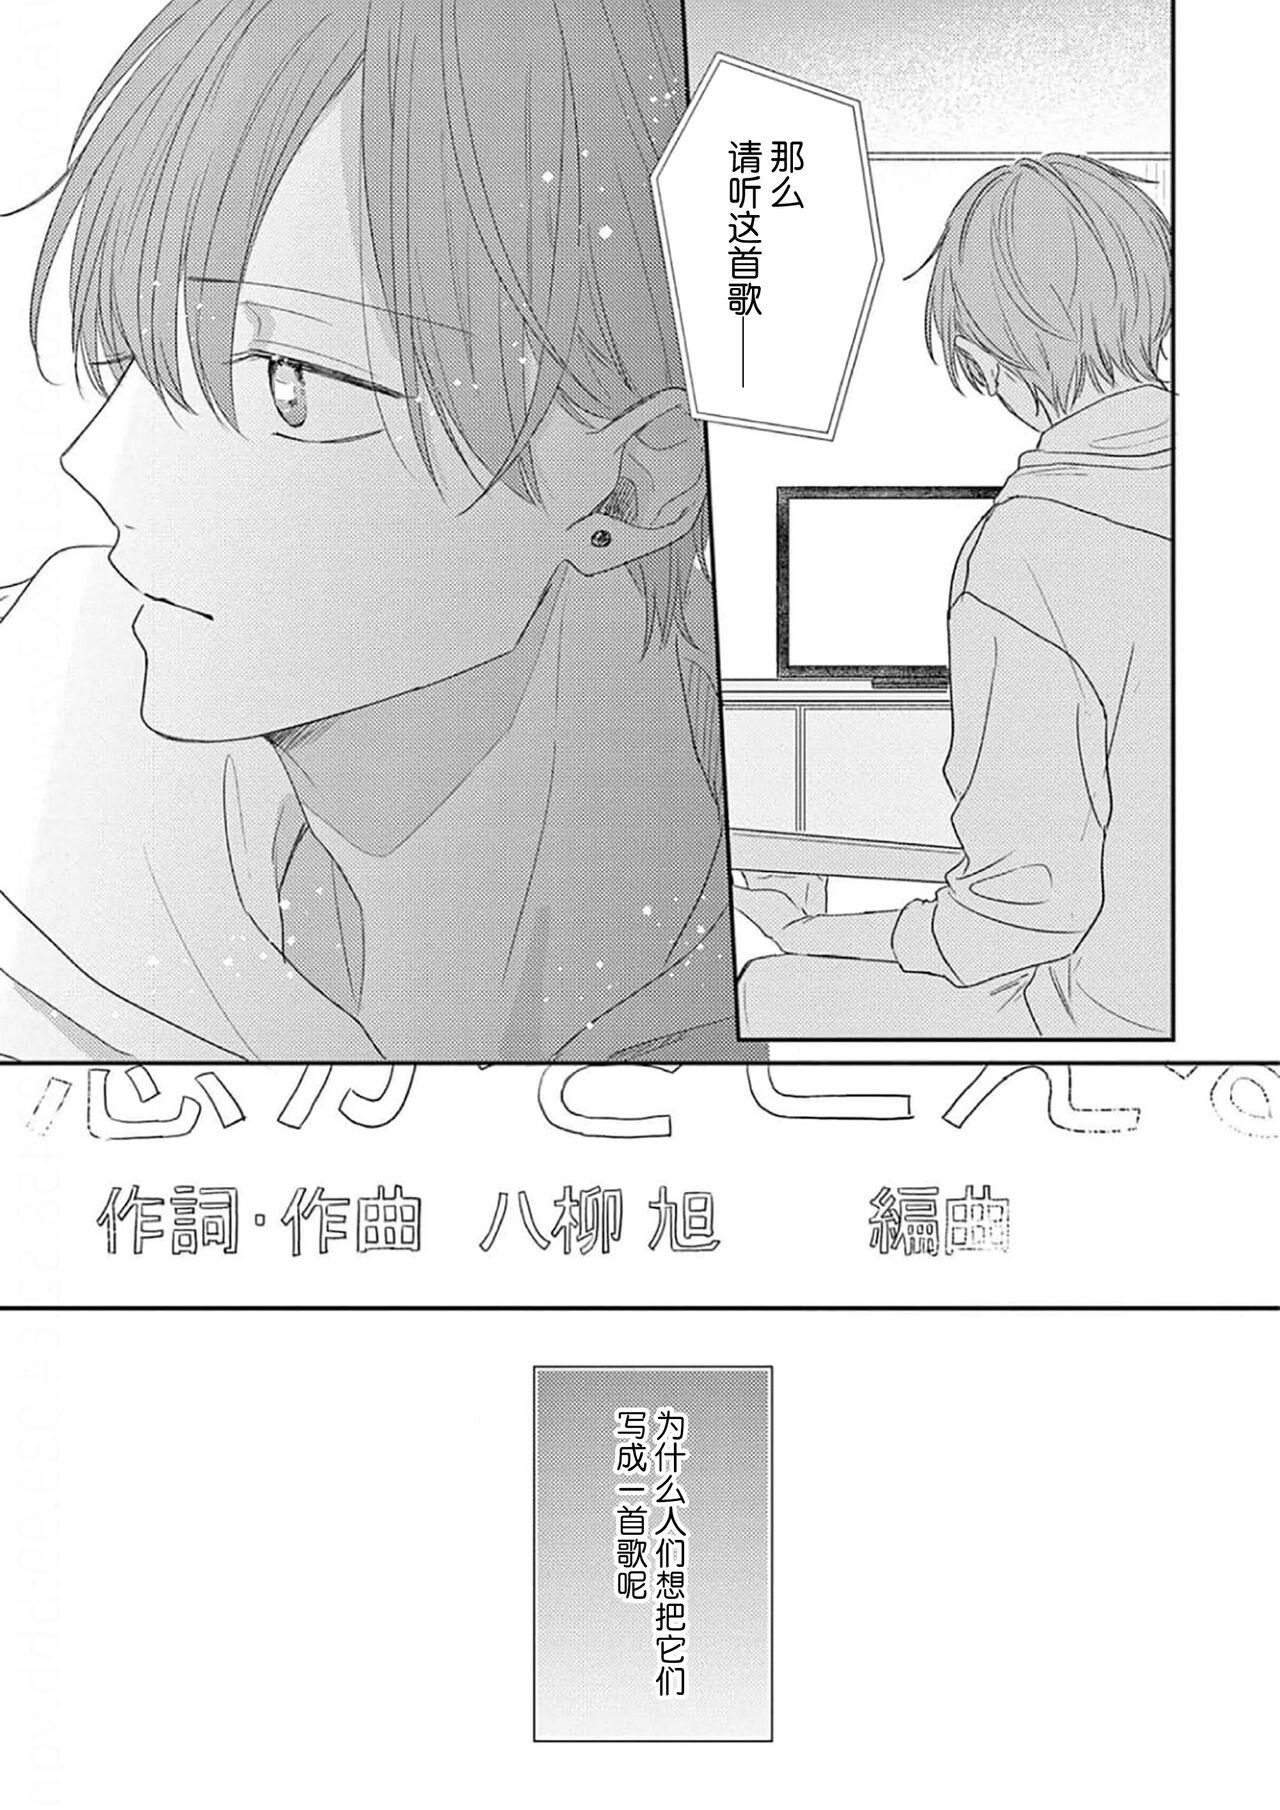 Urine Love Song ga Owaru made - Until The End of A Love Song | 直到这曲恋歌结束为止 Eurosex - Page 6